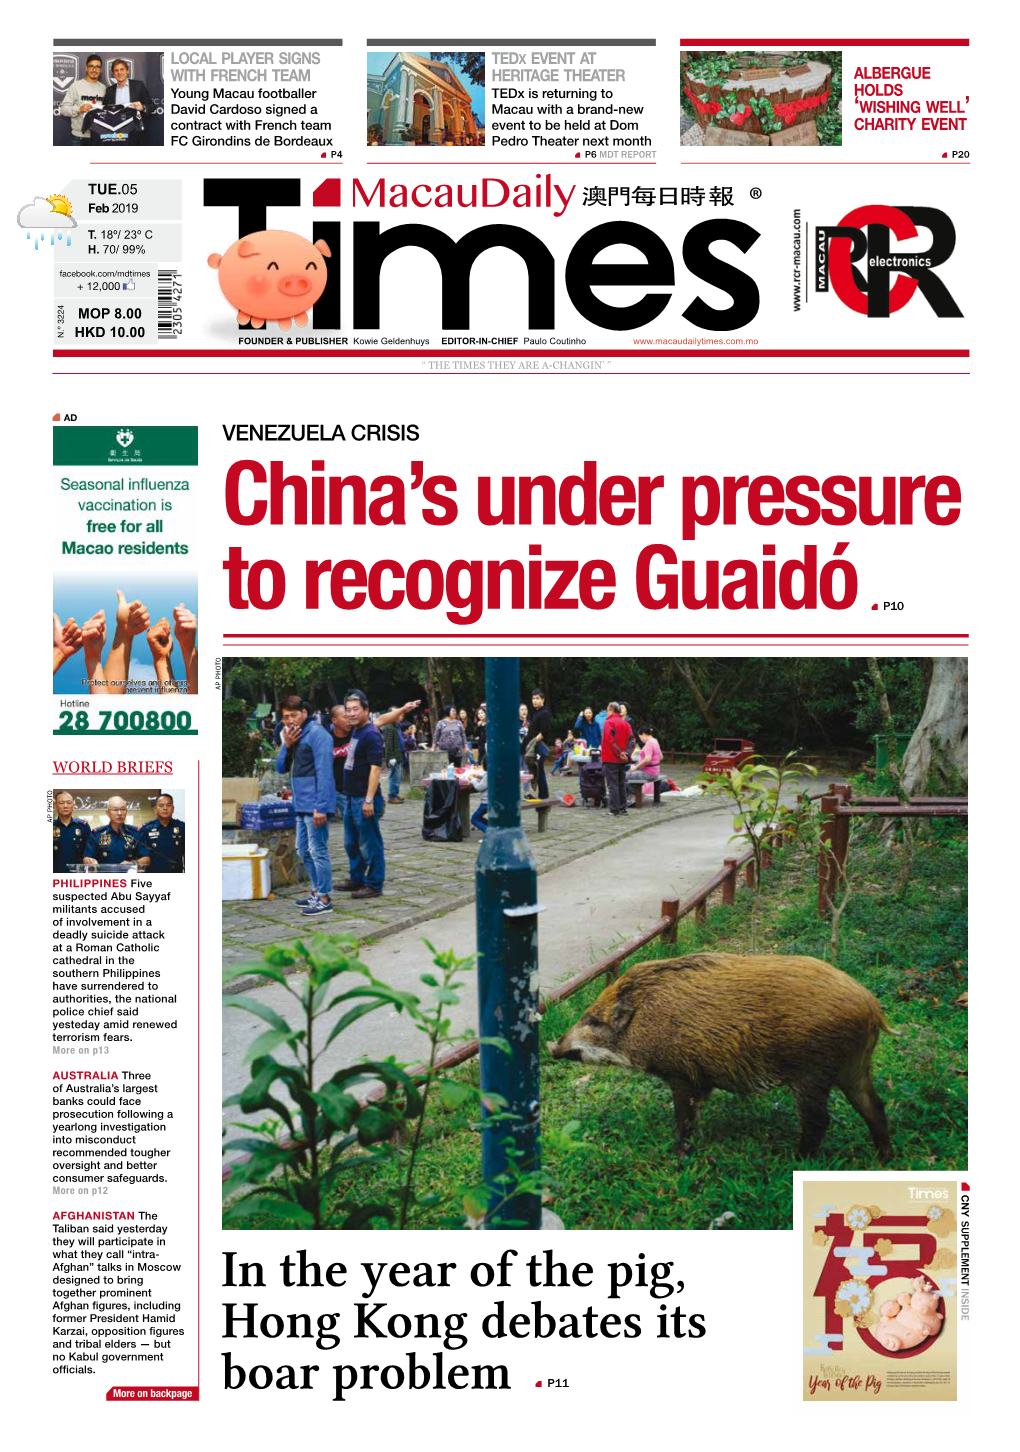 In the Year of the Pig, Hong Kong Debates Its Boar Problem